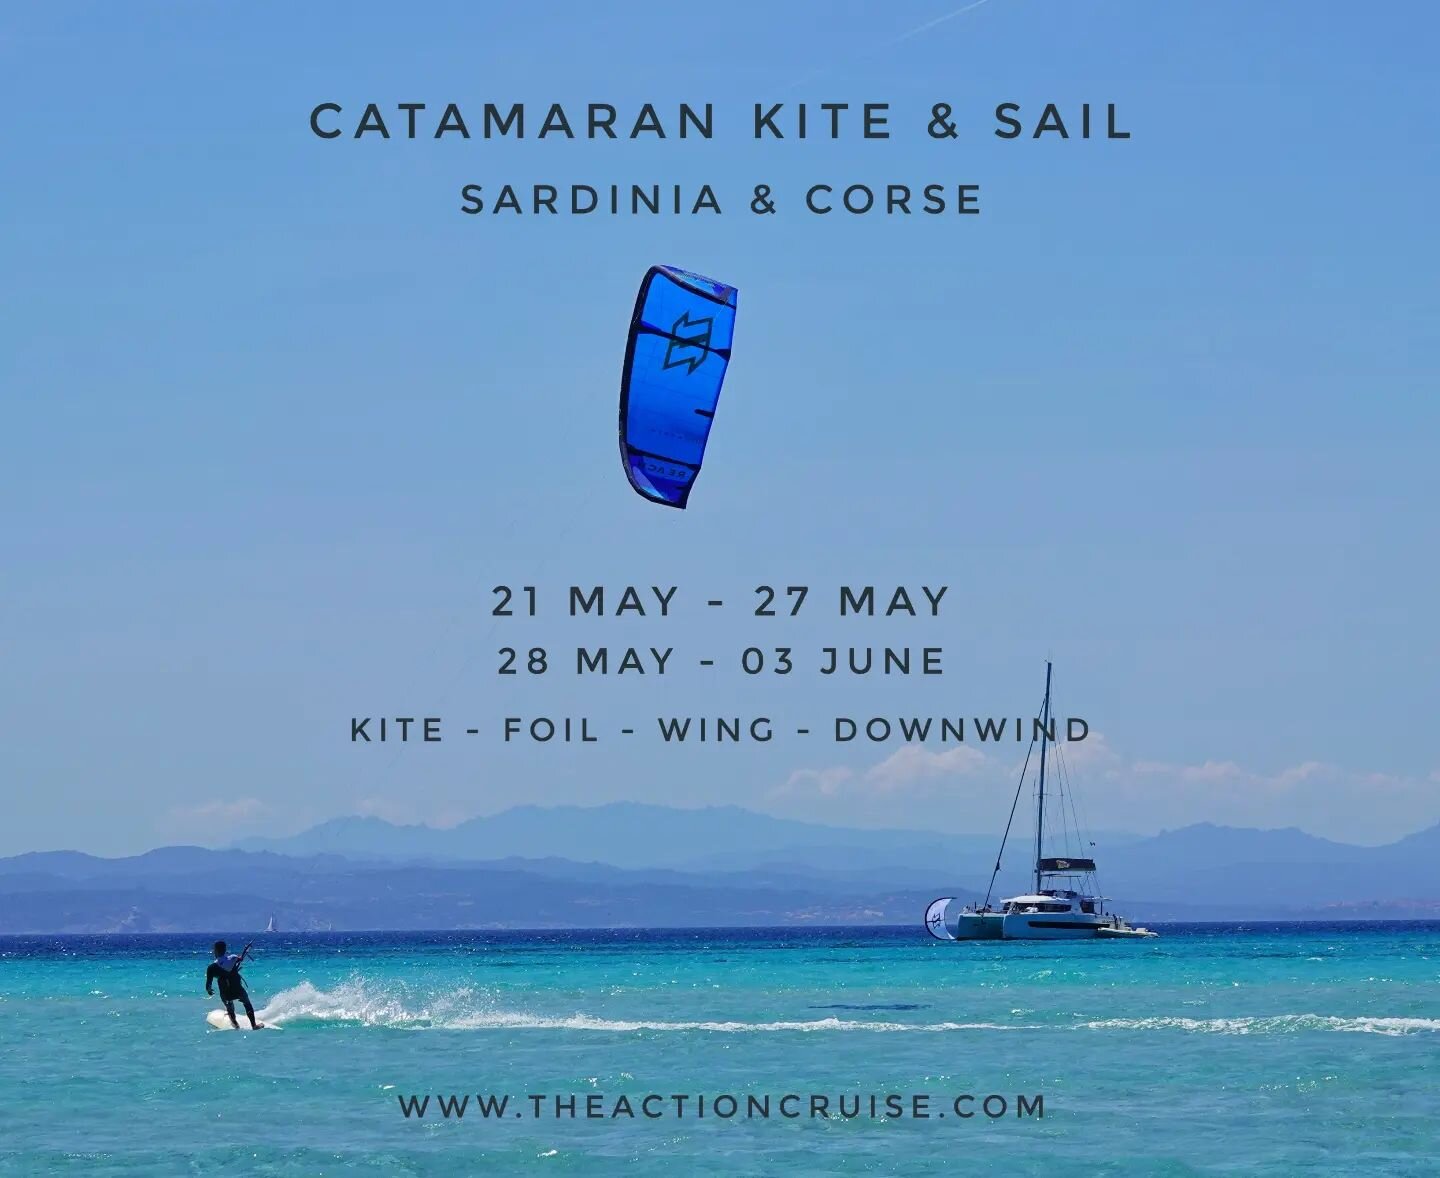 Last seats for the Catamaran Kite &amp; Sail in Sardinia ⛵️🇮🇹
.
21 May - 27 May | 4 seats
28 May - 03 June | 2 seats
.
Kite, Foil, Wing in the best secluded spots between Sardinia and Corse
.
Boarding in Cannigione
Flights / Ferry to Olbia
7 kiters